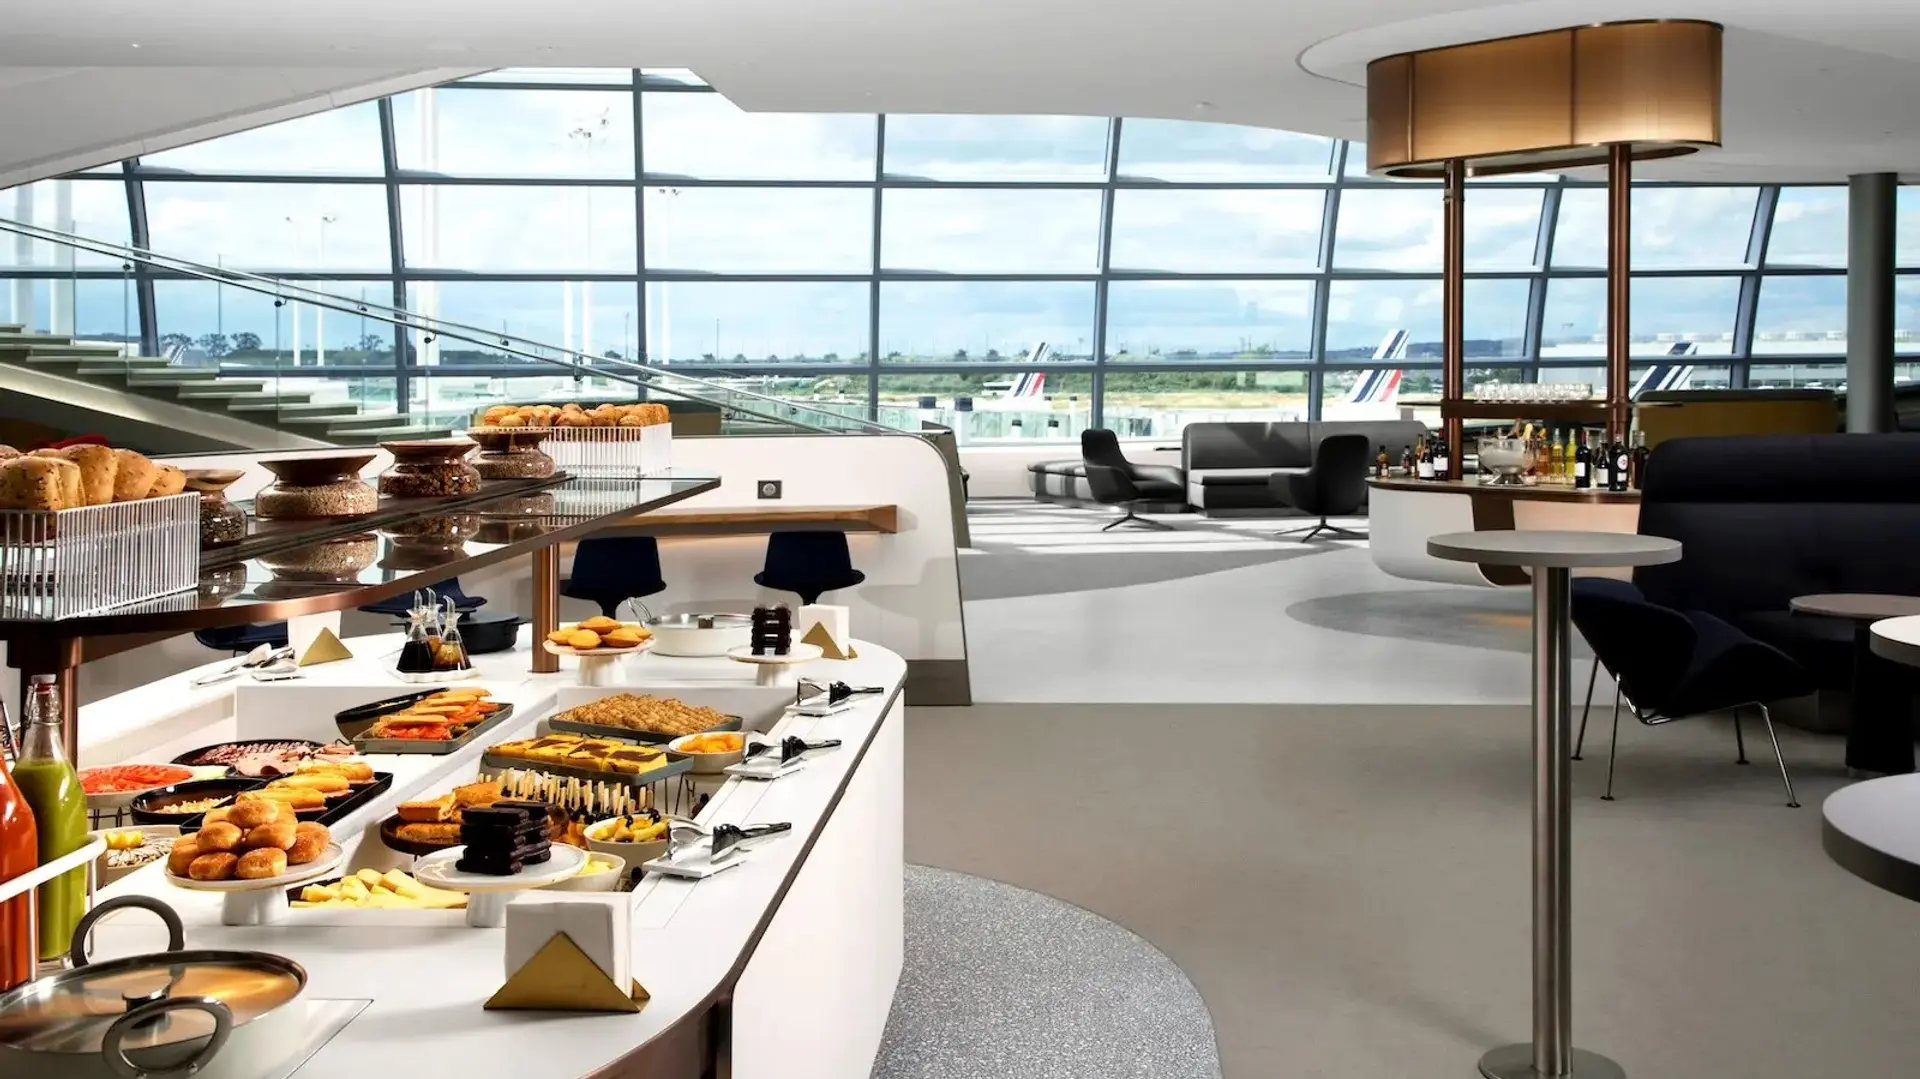 Airlines Articles - Air France unveils its new Business Class lounge at Paris-Charles de Gaulle